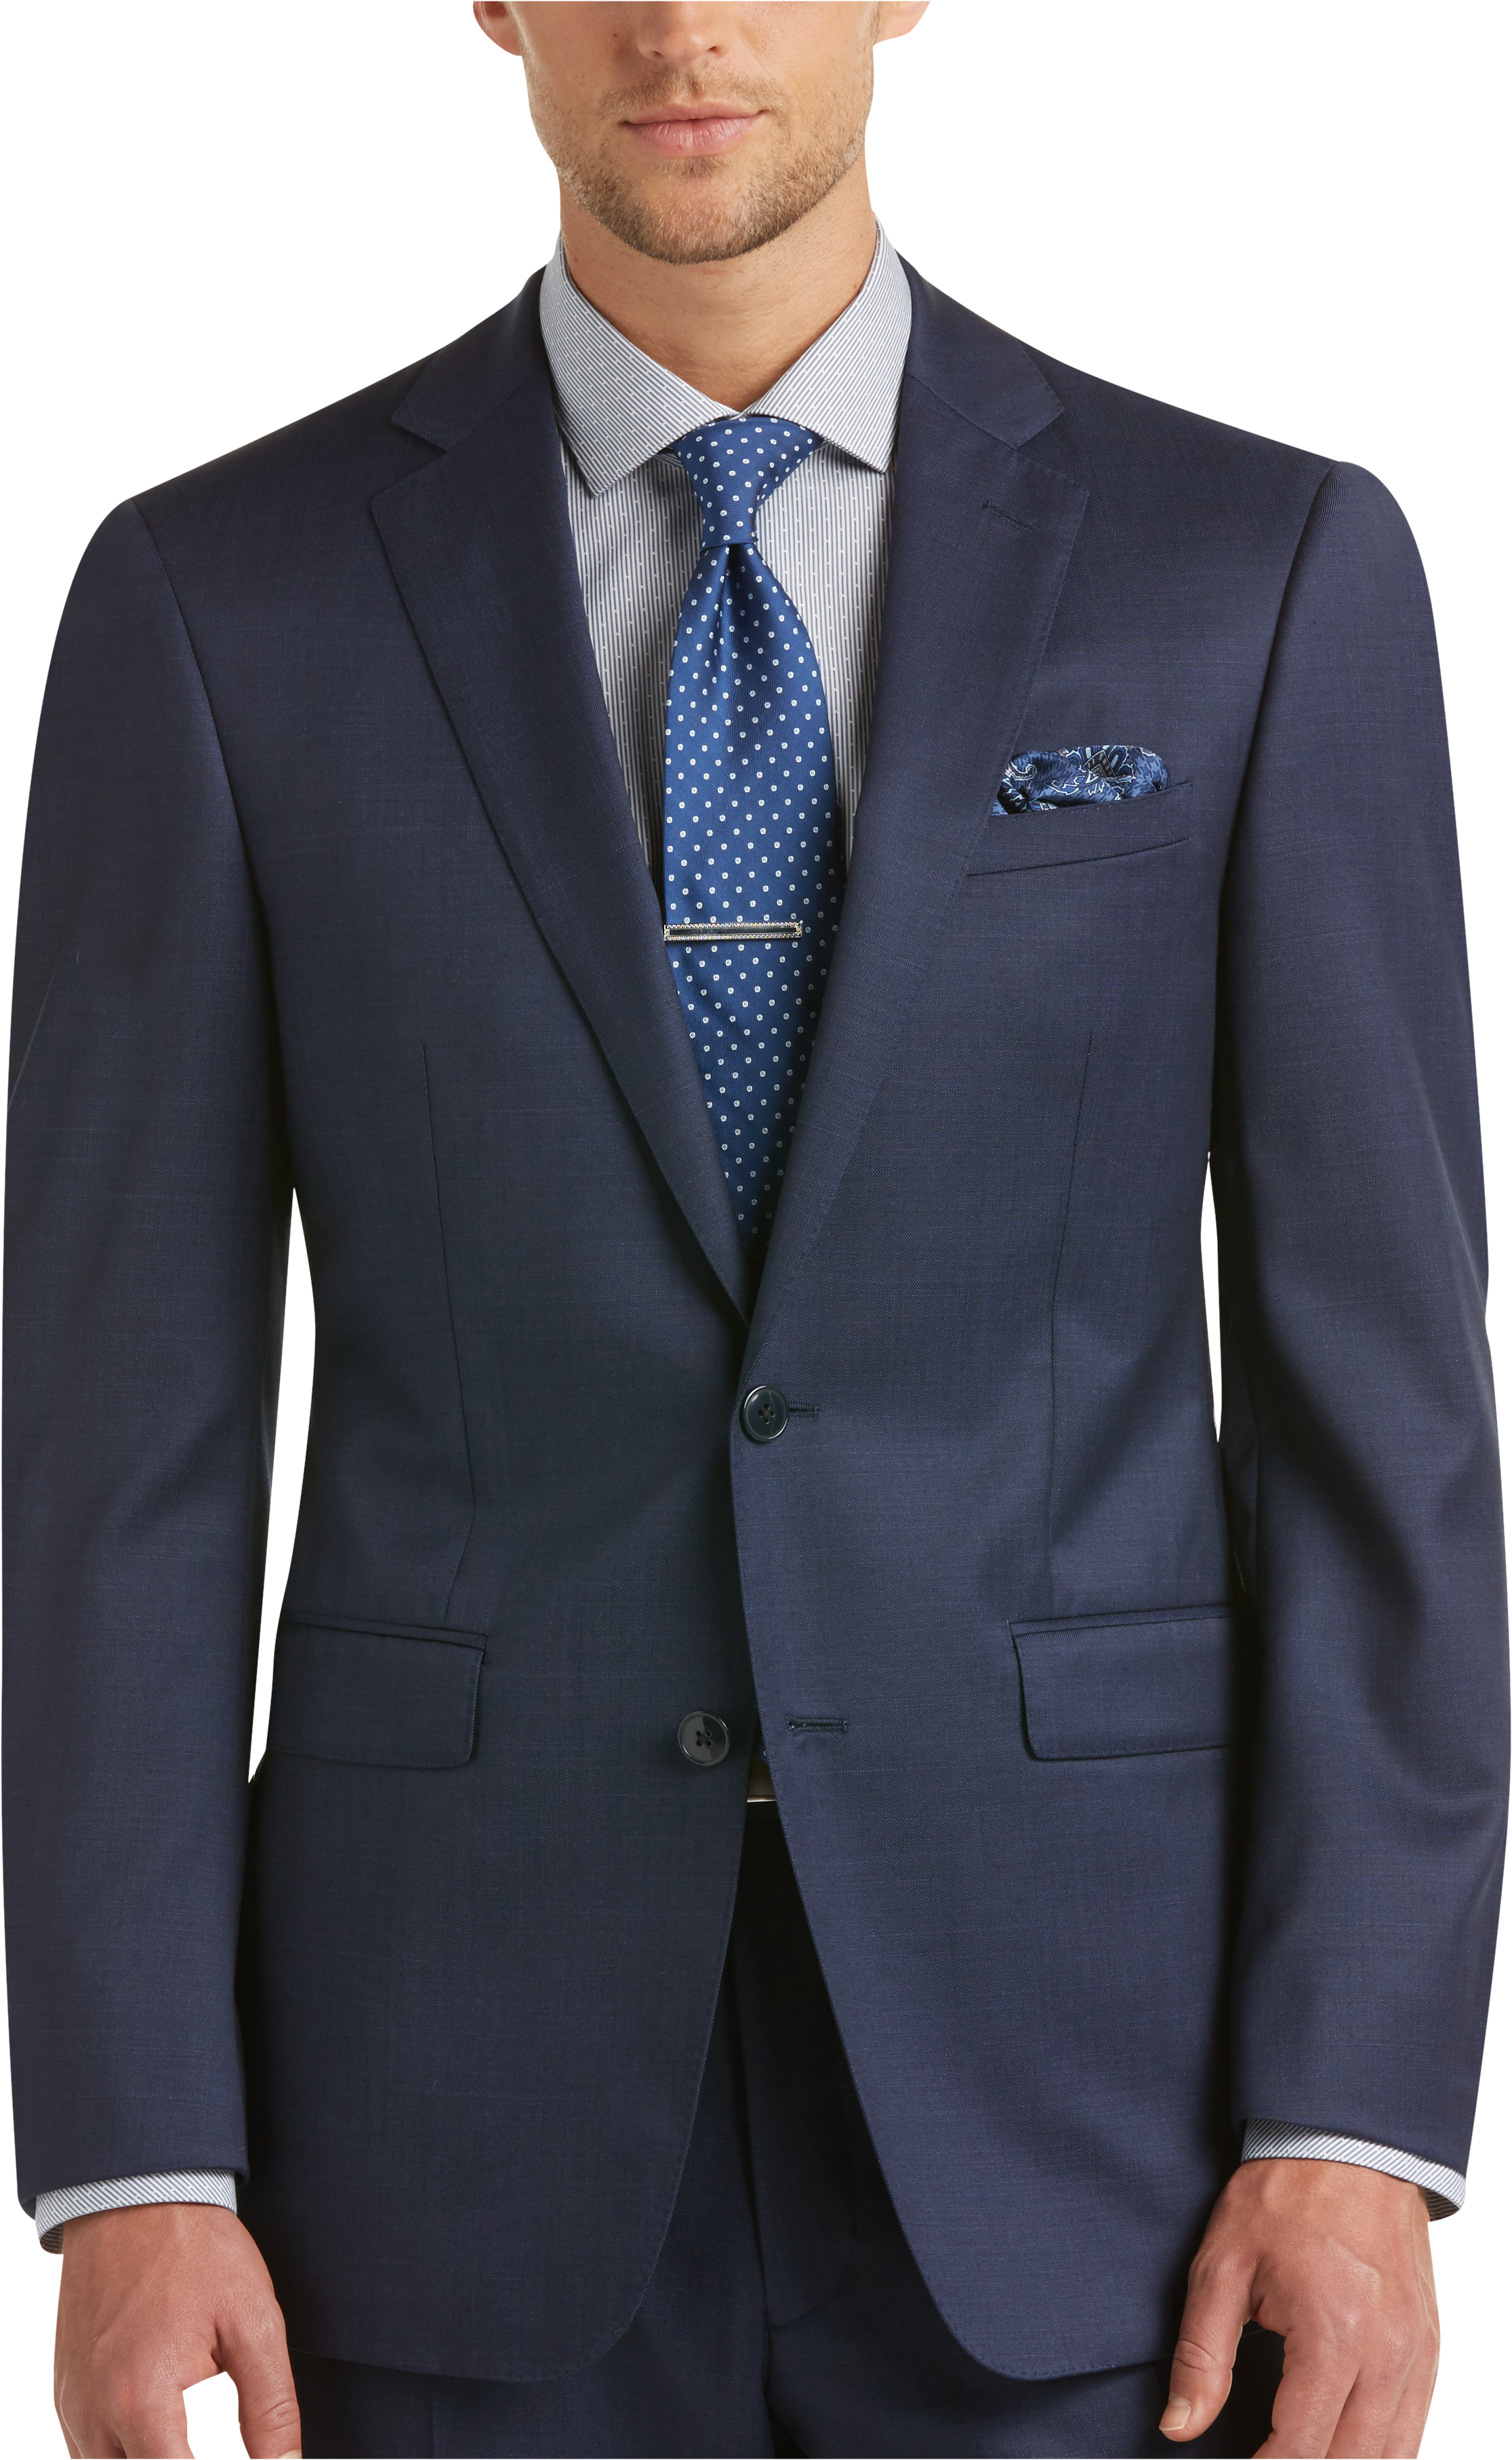 Sophisticated Suit | Mens Wearhouse